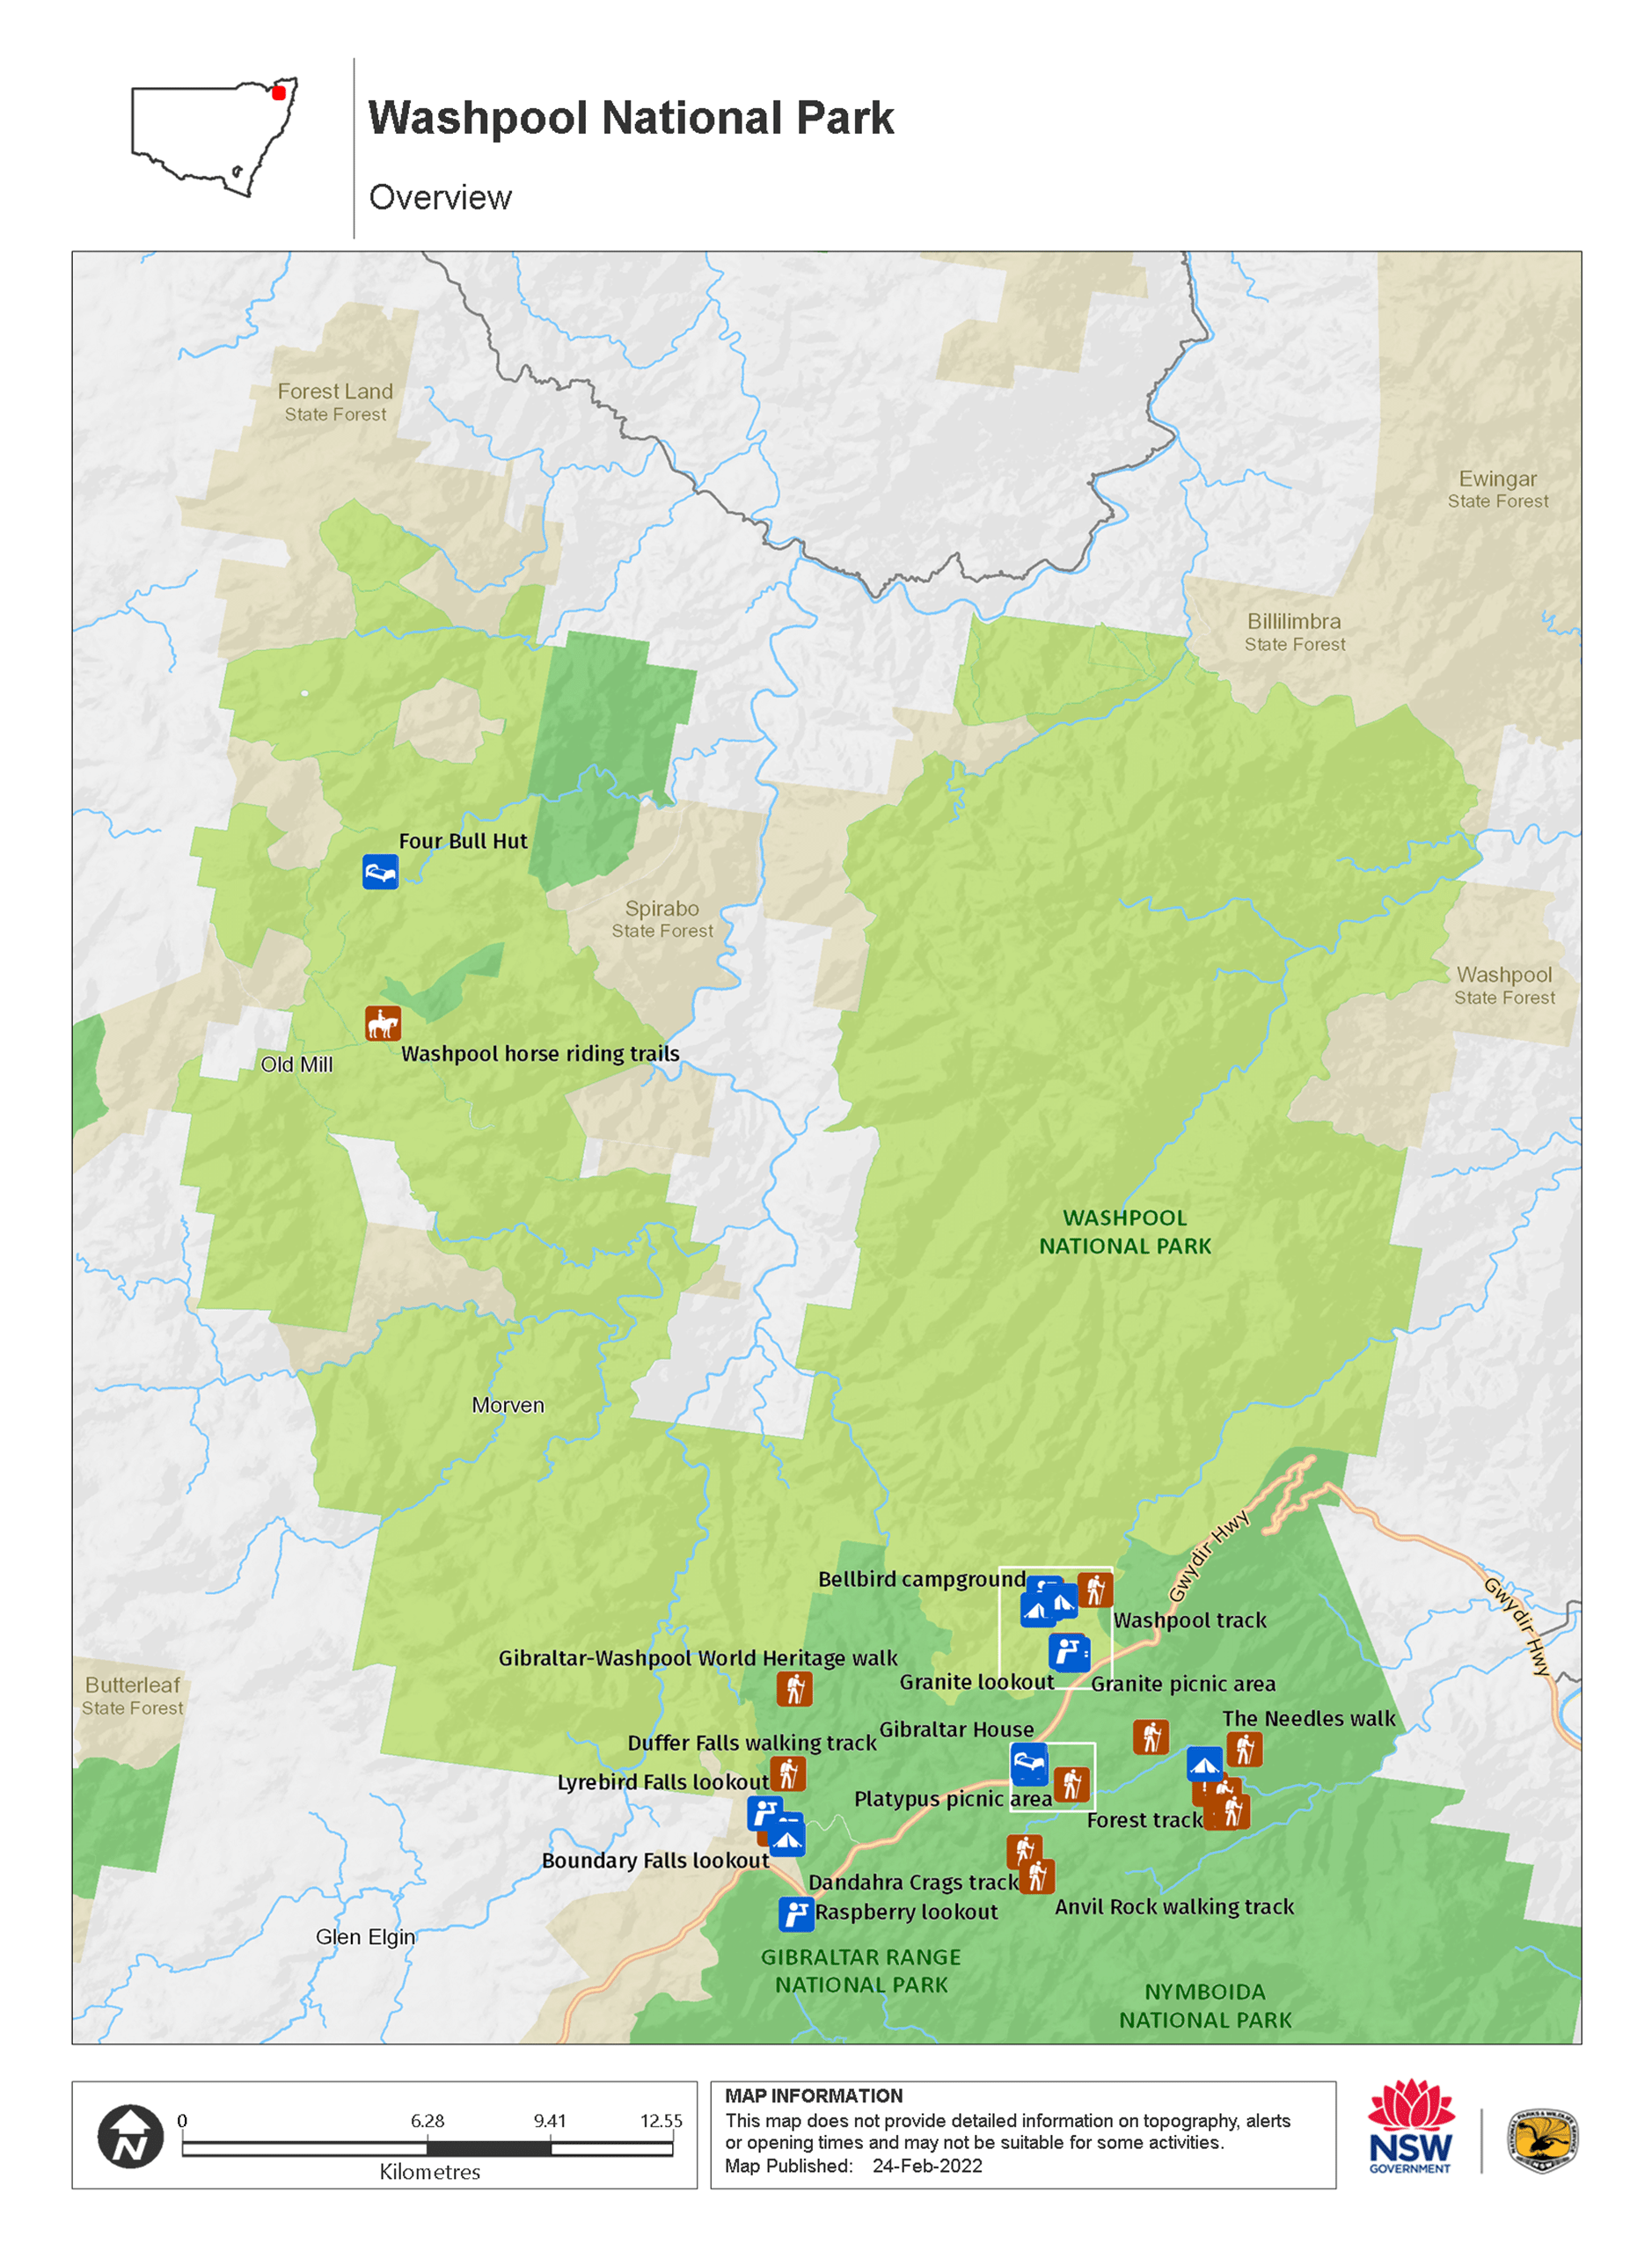 Washpool National Park - overview map